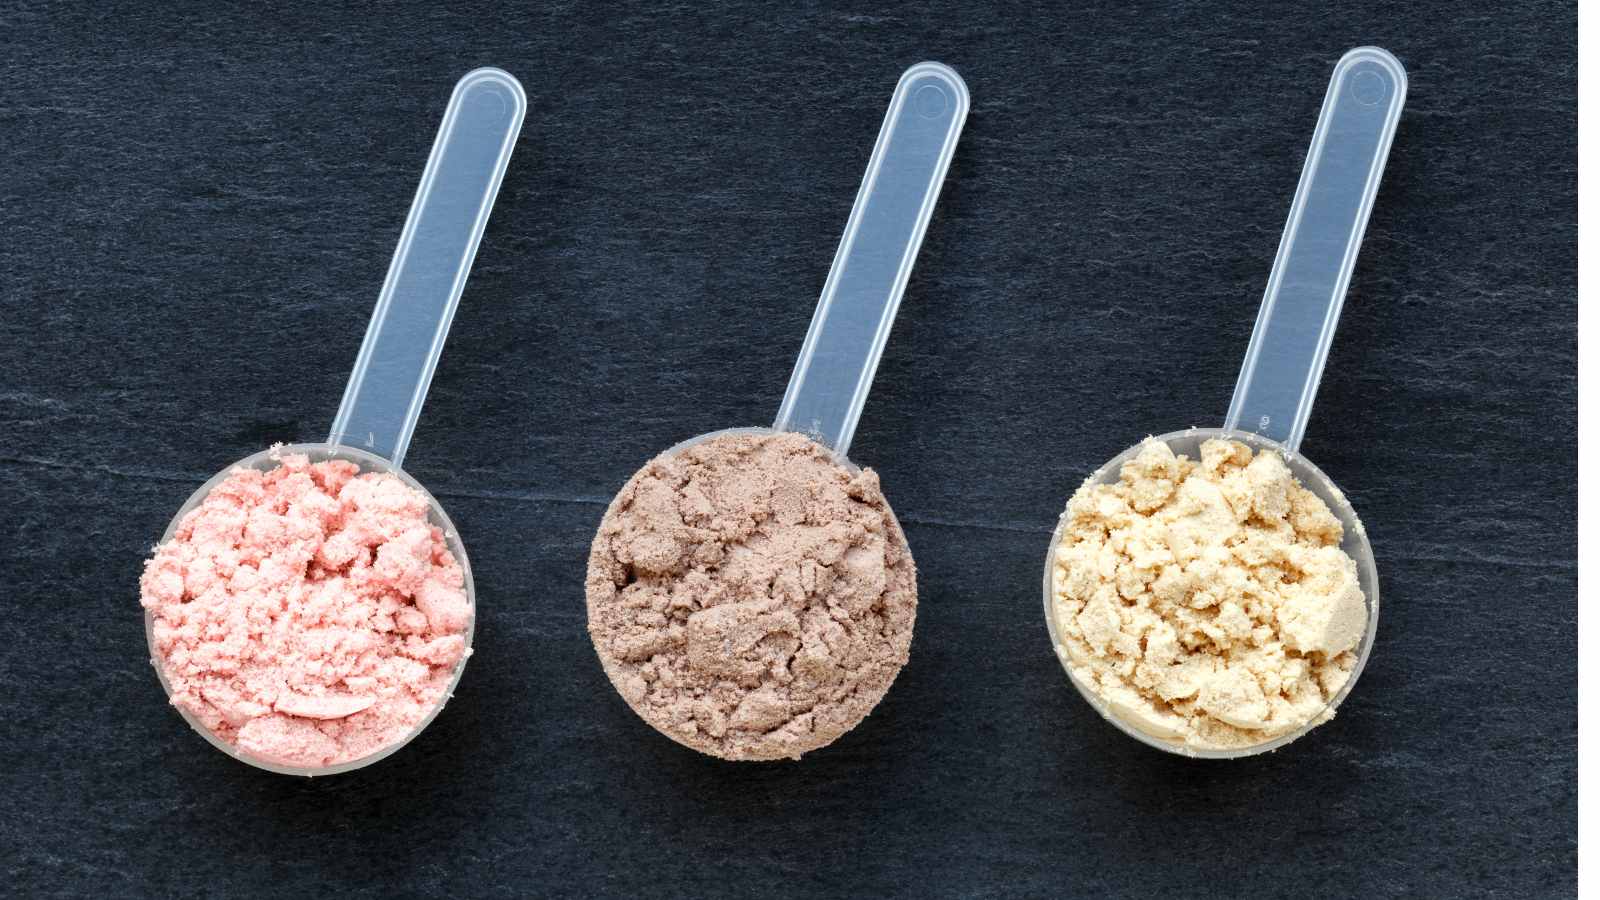 How to choose the best protein powder? 7 tips to follow